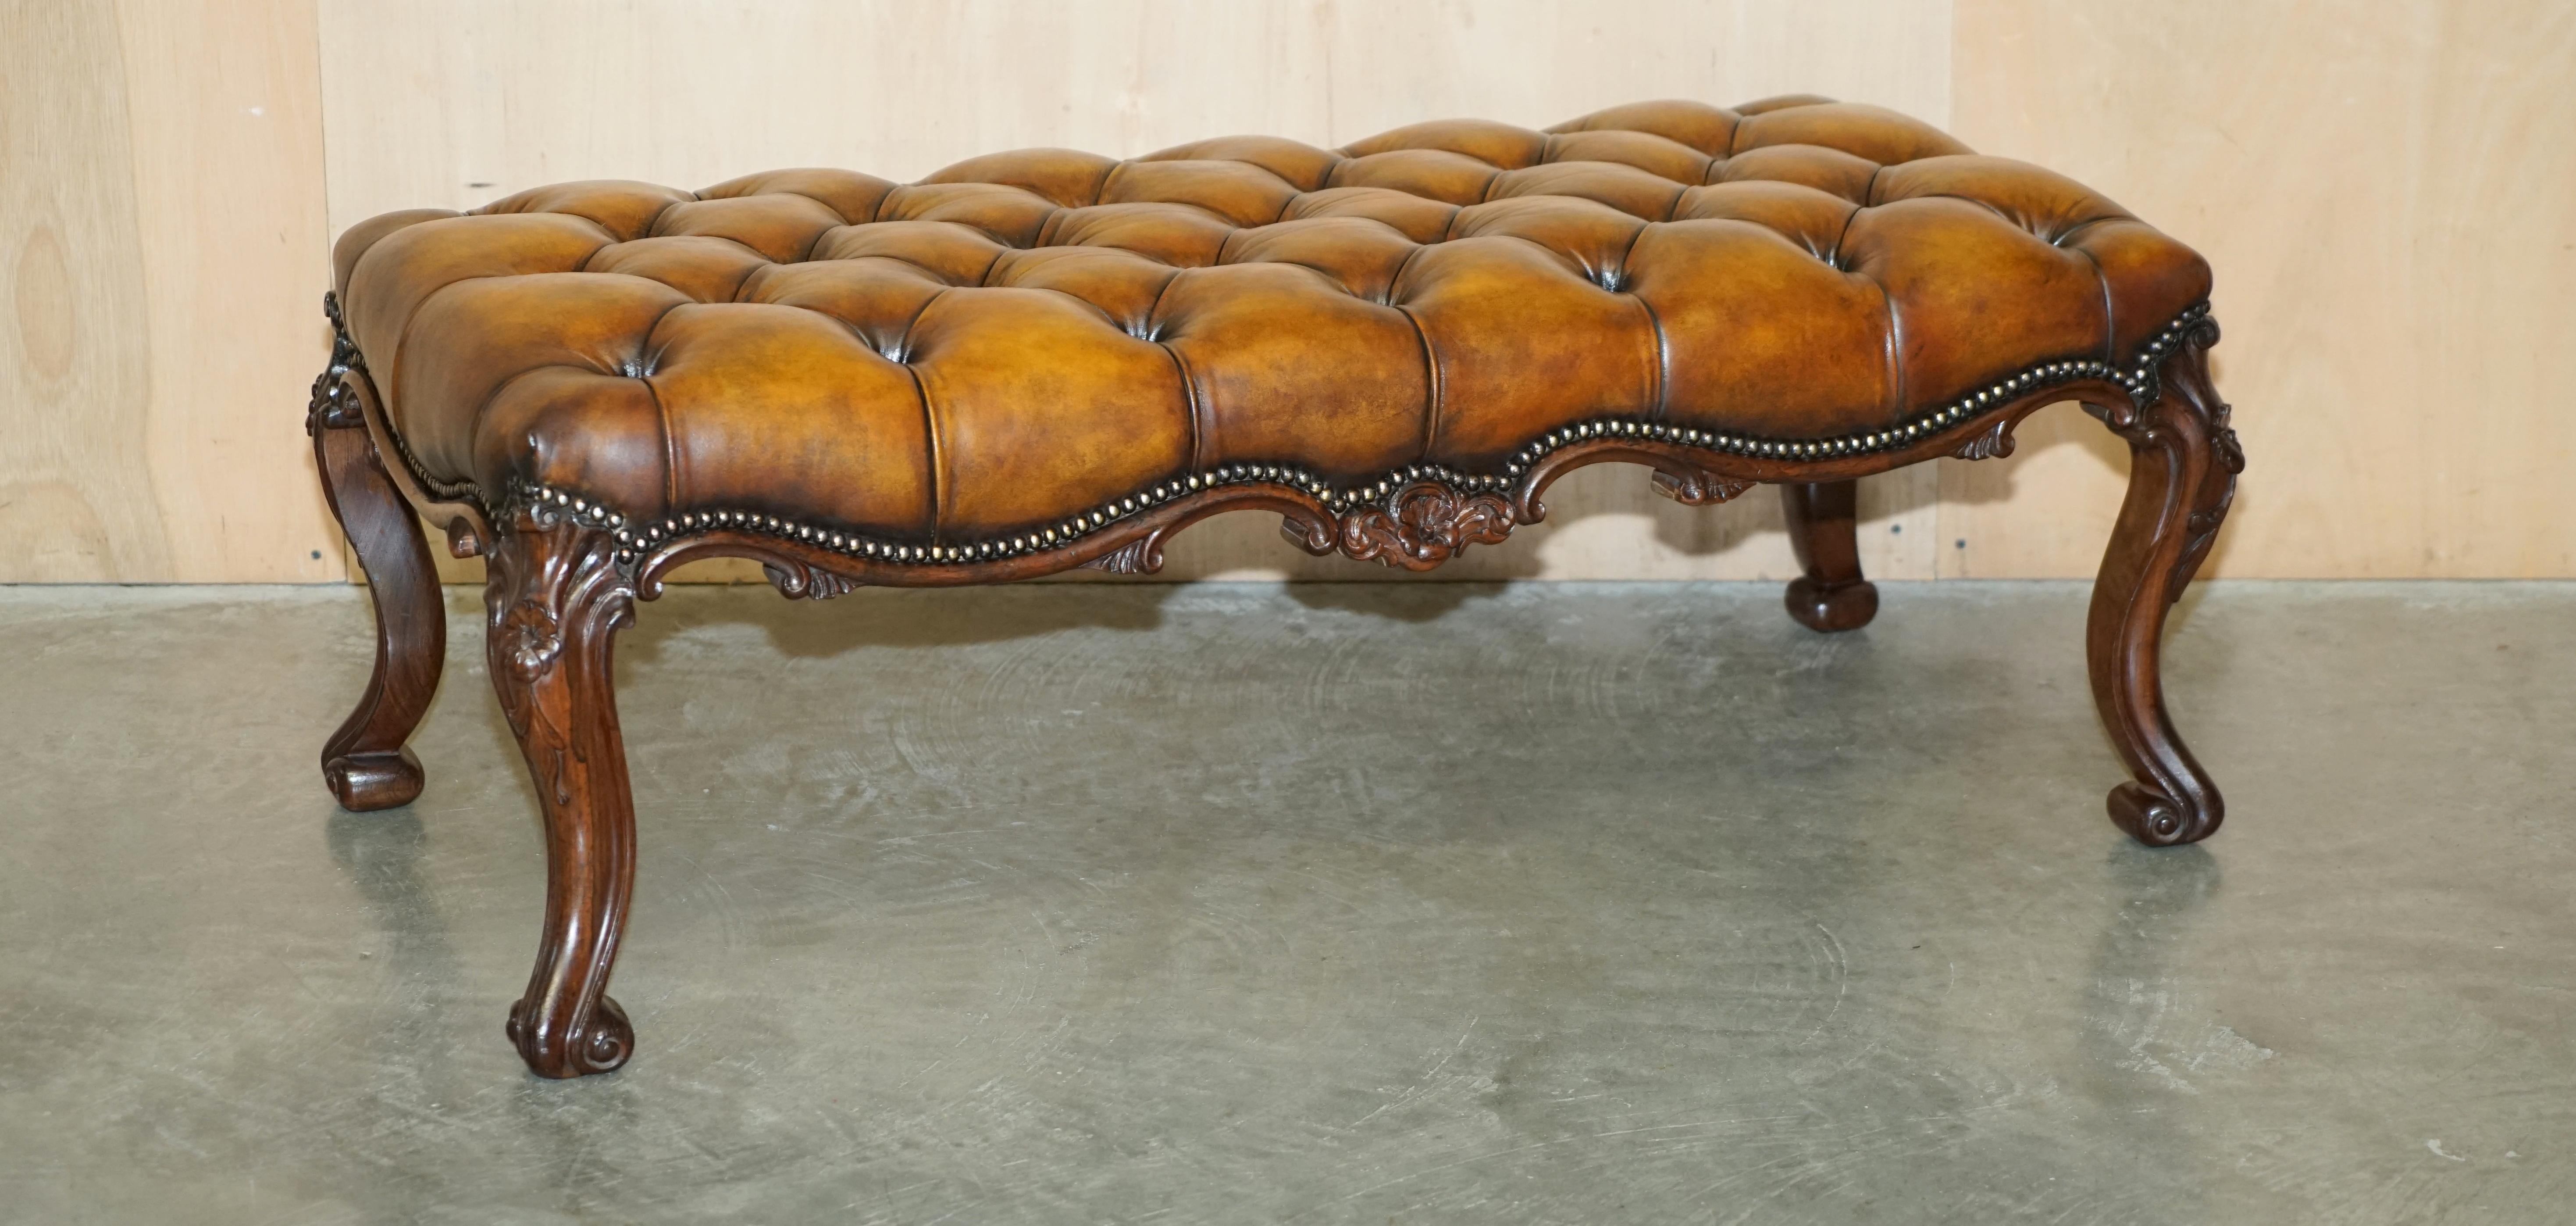 Royal House Antiques

Royal House Antiques is delighted to offer for sale this absolutely stunning fully restored hand dyed cigar brown leather Victorian Chesterfield footstool with hand carved show frame body 

Please note the delivery fee listed